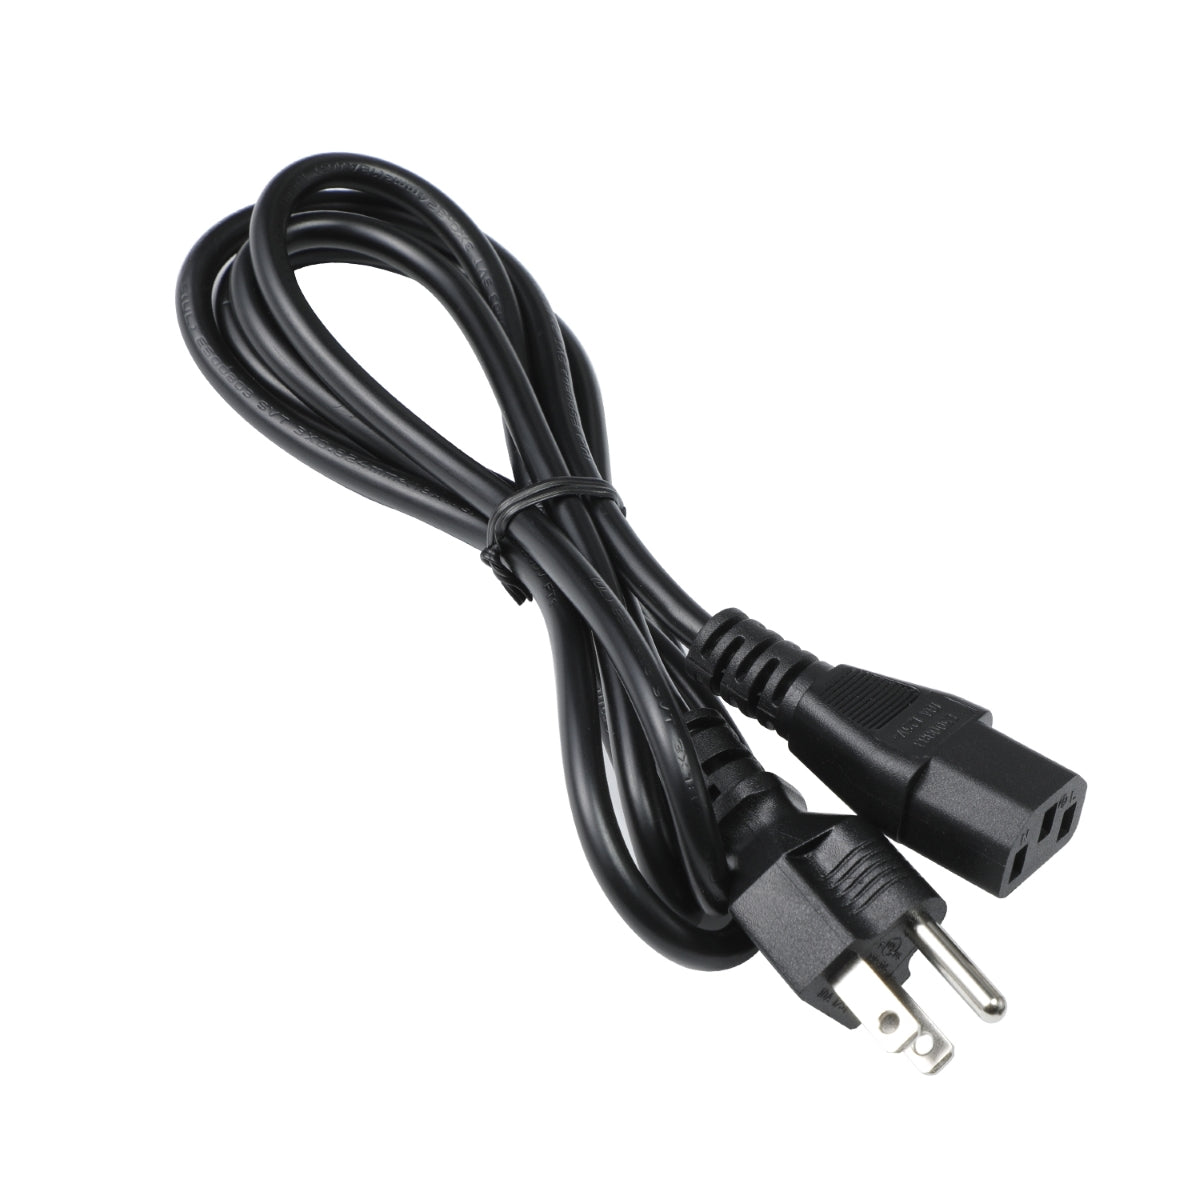 Power Cord for ION Party Rocker Max.